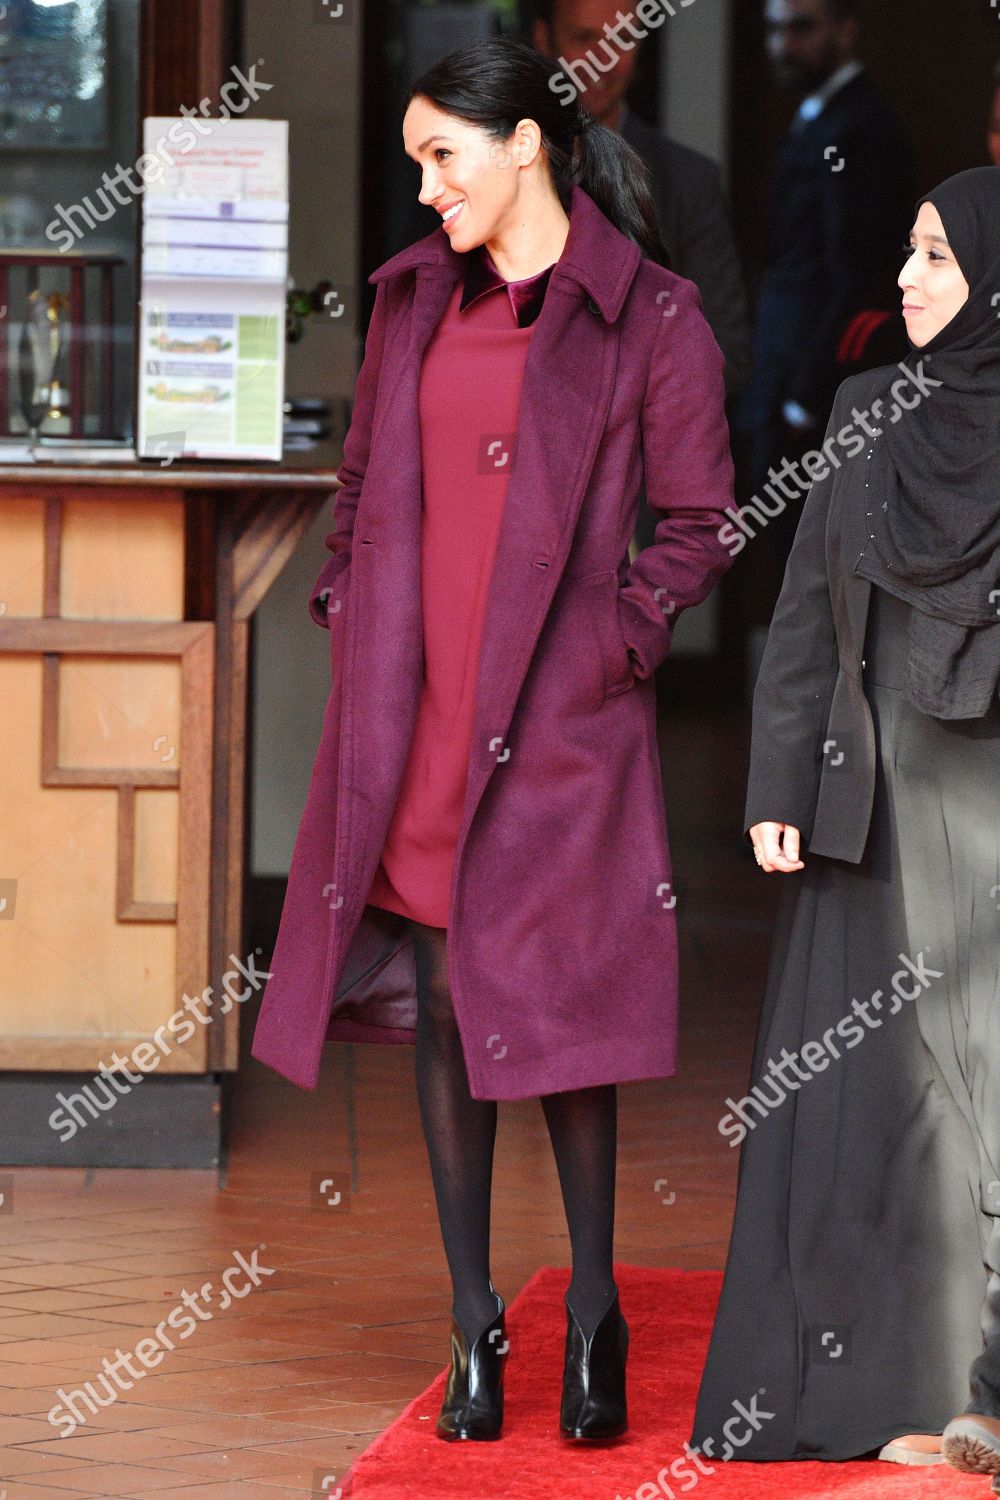 meghan-duchess-of-sussex-visit-to-the-hubb-community-kitchen-london-uk-shutterstock-editorial-9988841ag.jpg